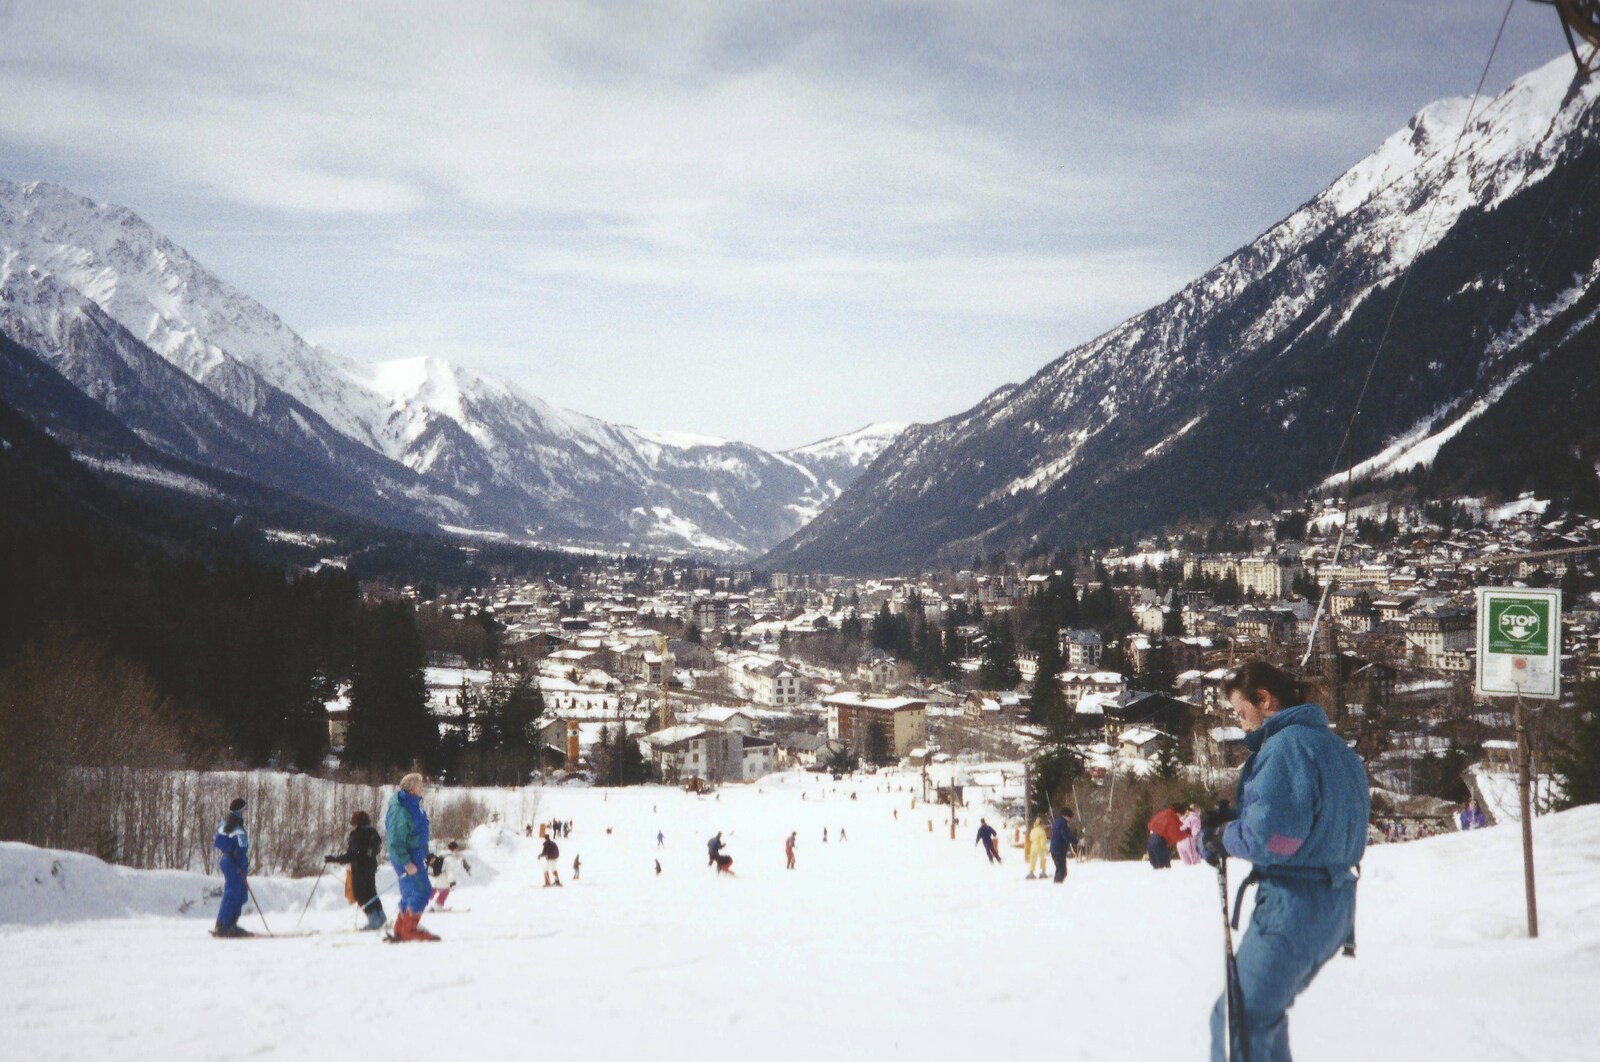 Skiing With Sean, Chamonix, Haute-Savoie, France - 15th March 1999: A view of Chamonix from Les Planards